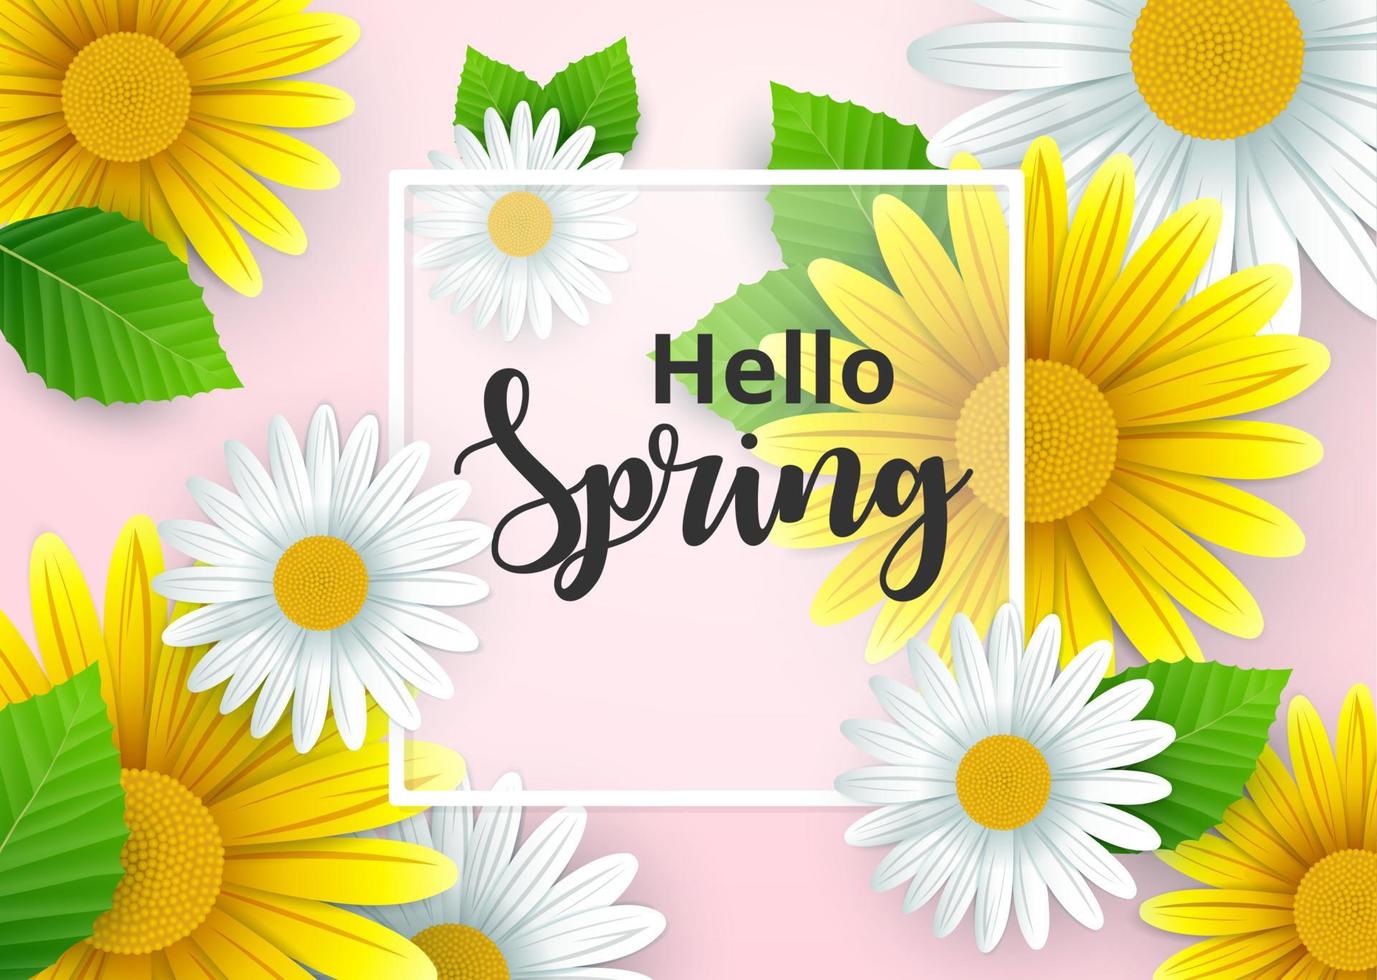 Hello spring background with beautiful flowers vector